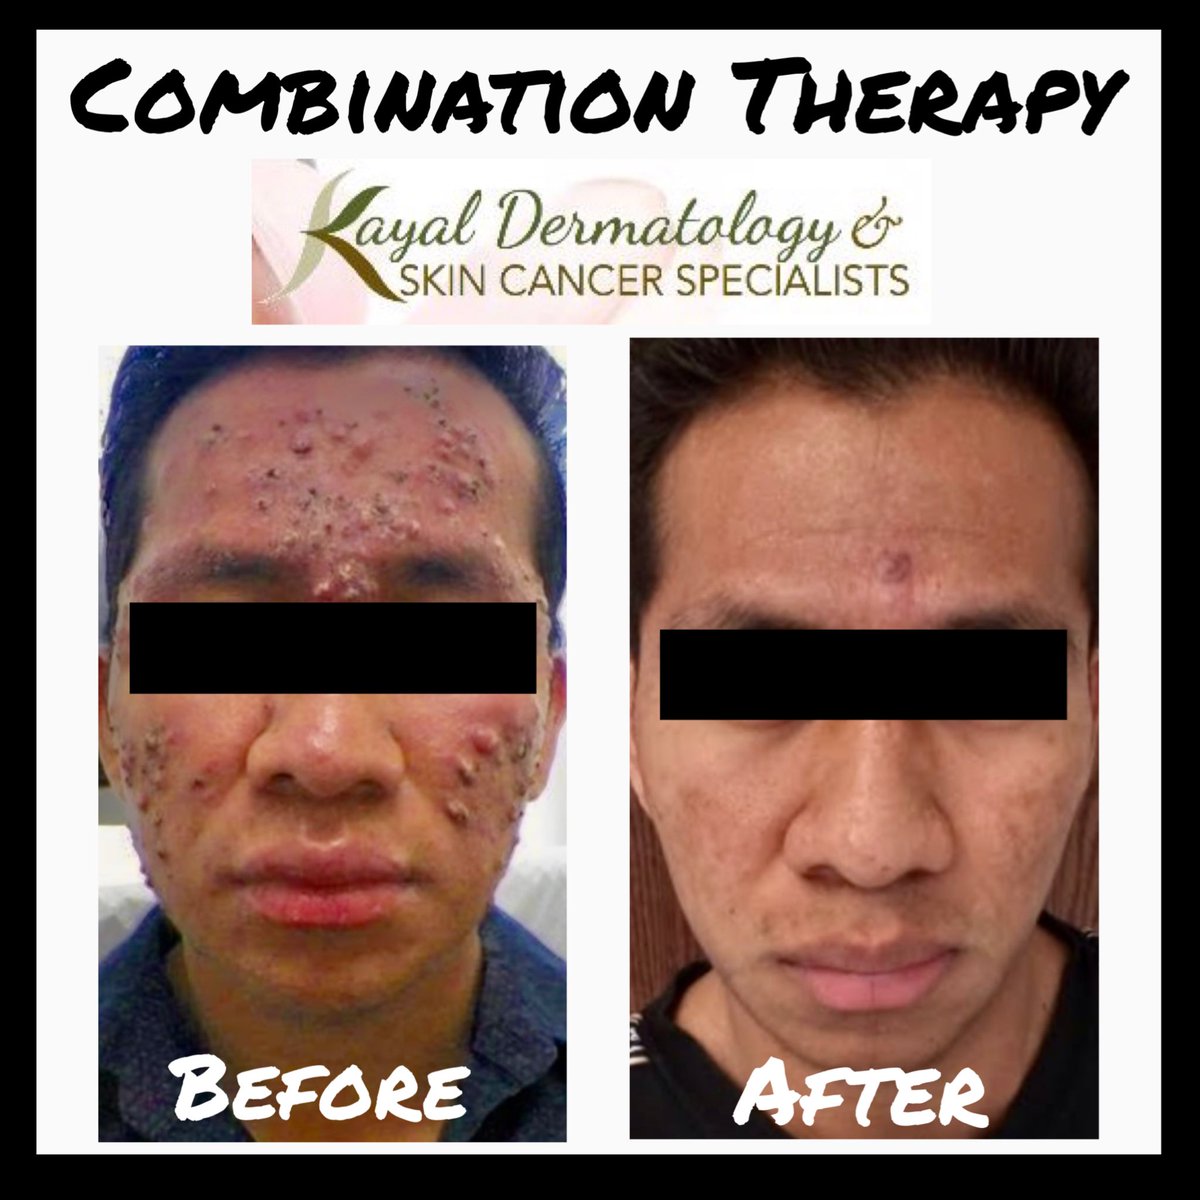 WOW! Check out this result from #CombinationTherapy using #Accutane with Neocutis glycolic cleanser, Revision’s #retinol with #VitaminC and a #VIpeel … Kayal Dermatology & Skin Cancer Specialists @KayalDerm